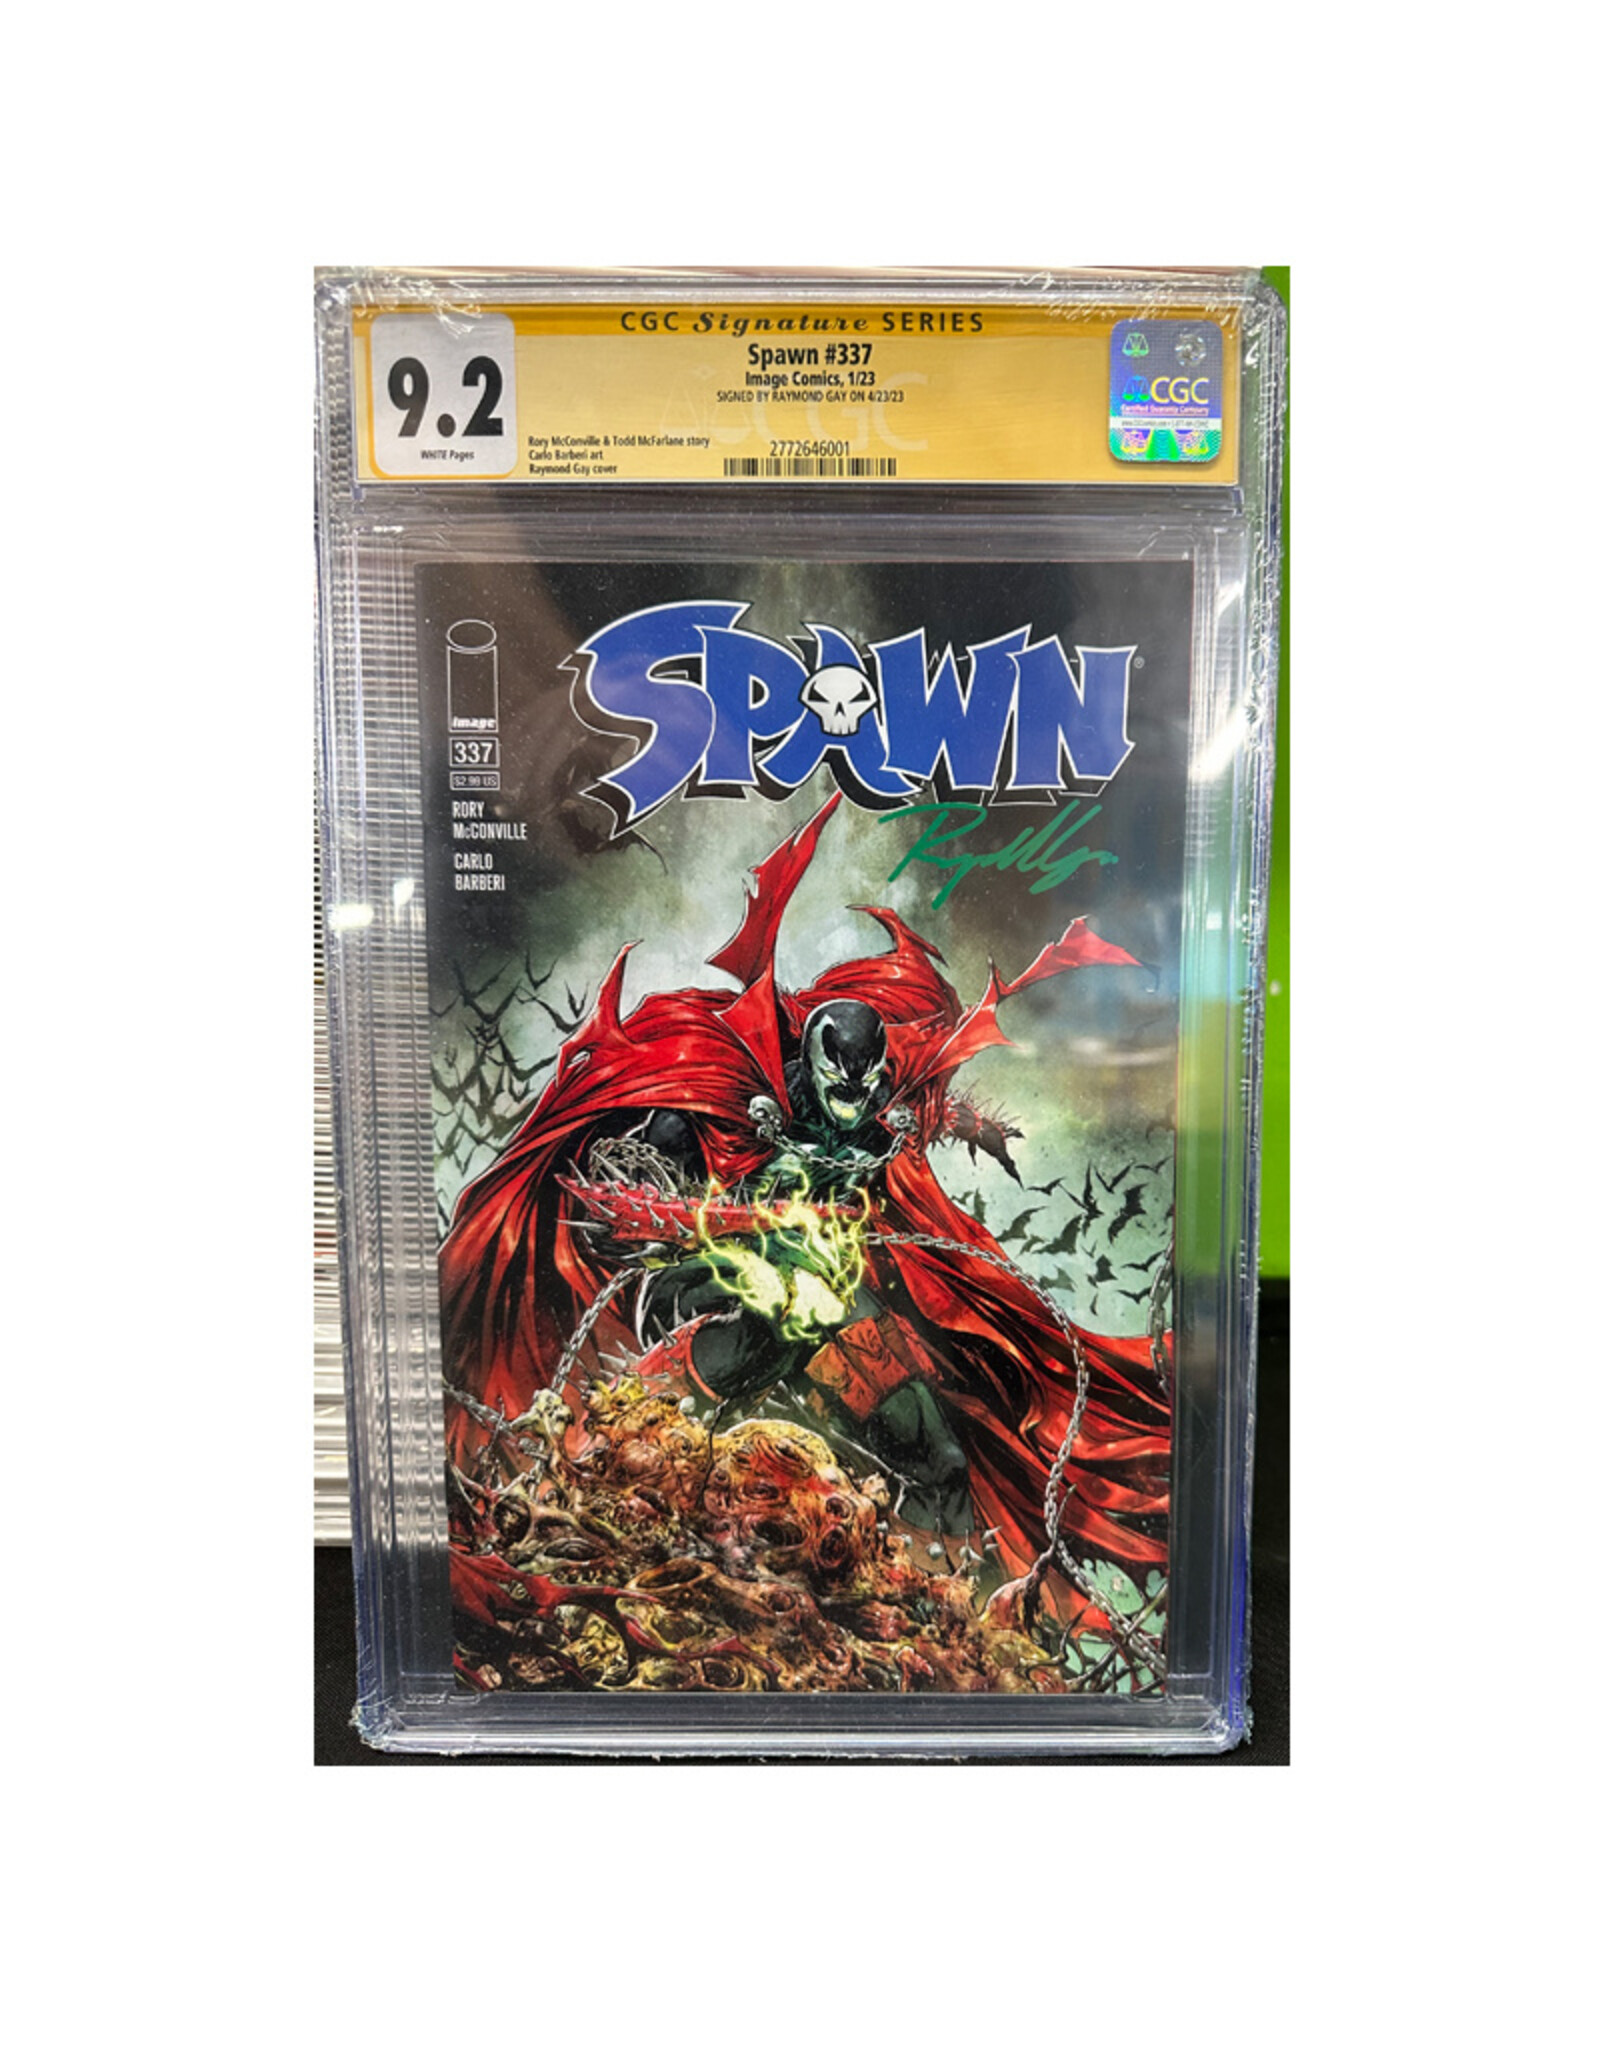 Image Comics Spawn #337 CGC Graded 9.2 Signed by Raymond Gay